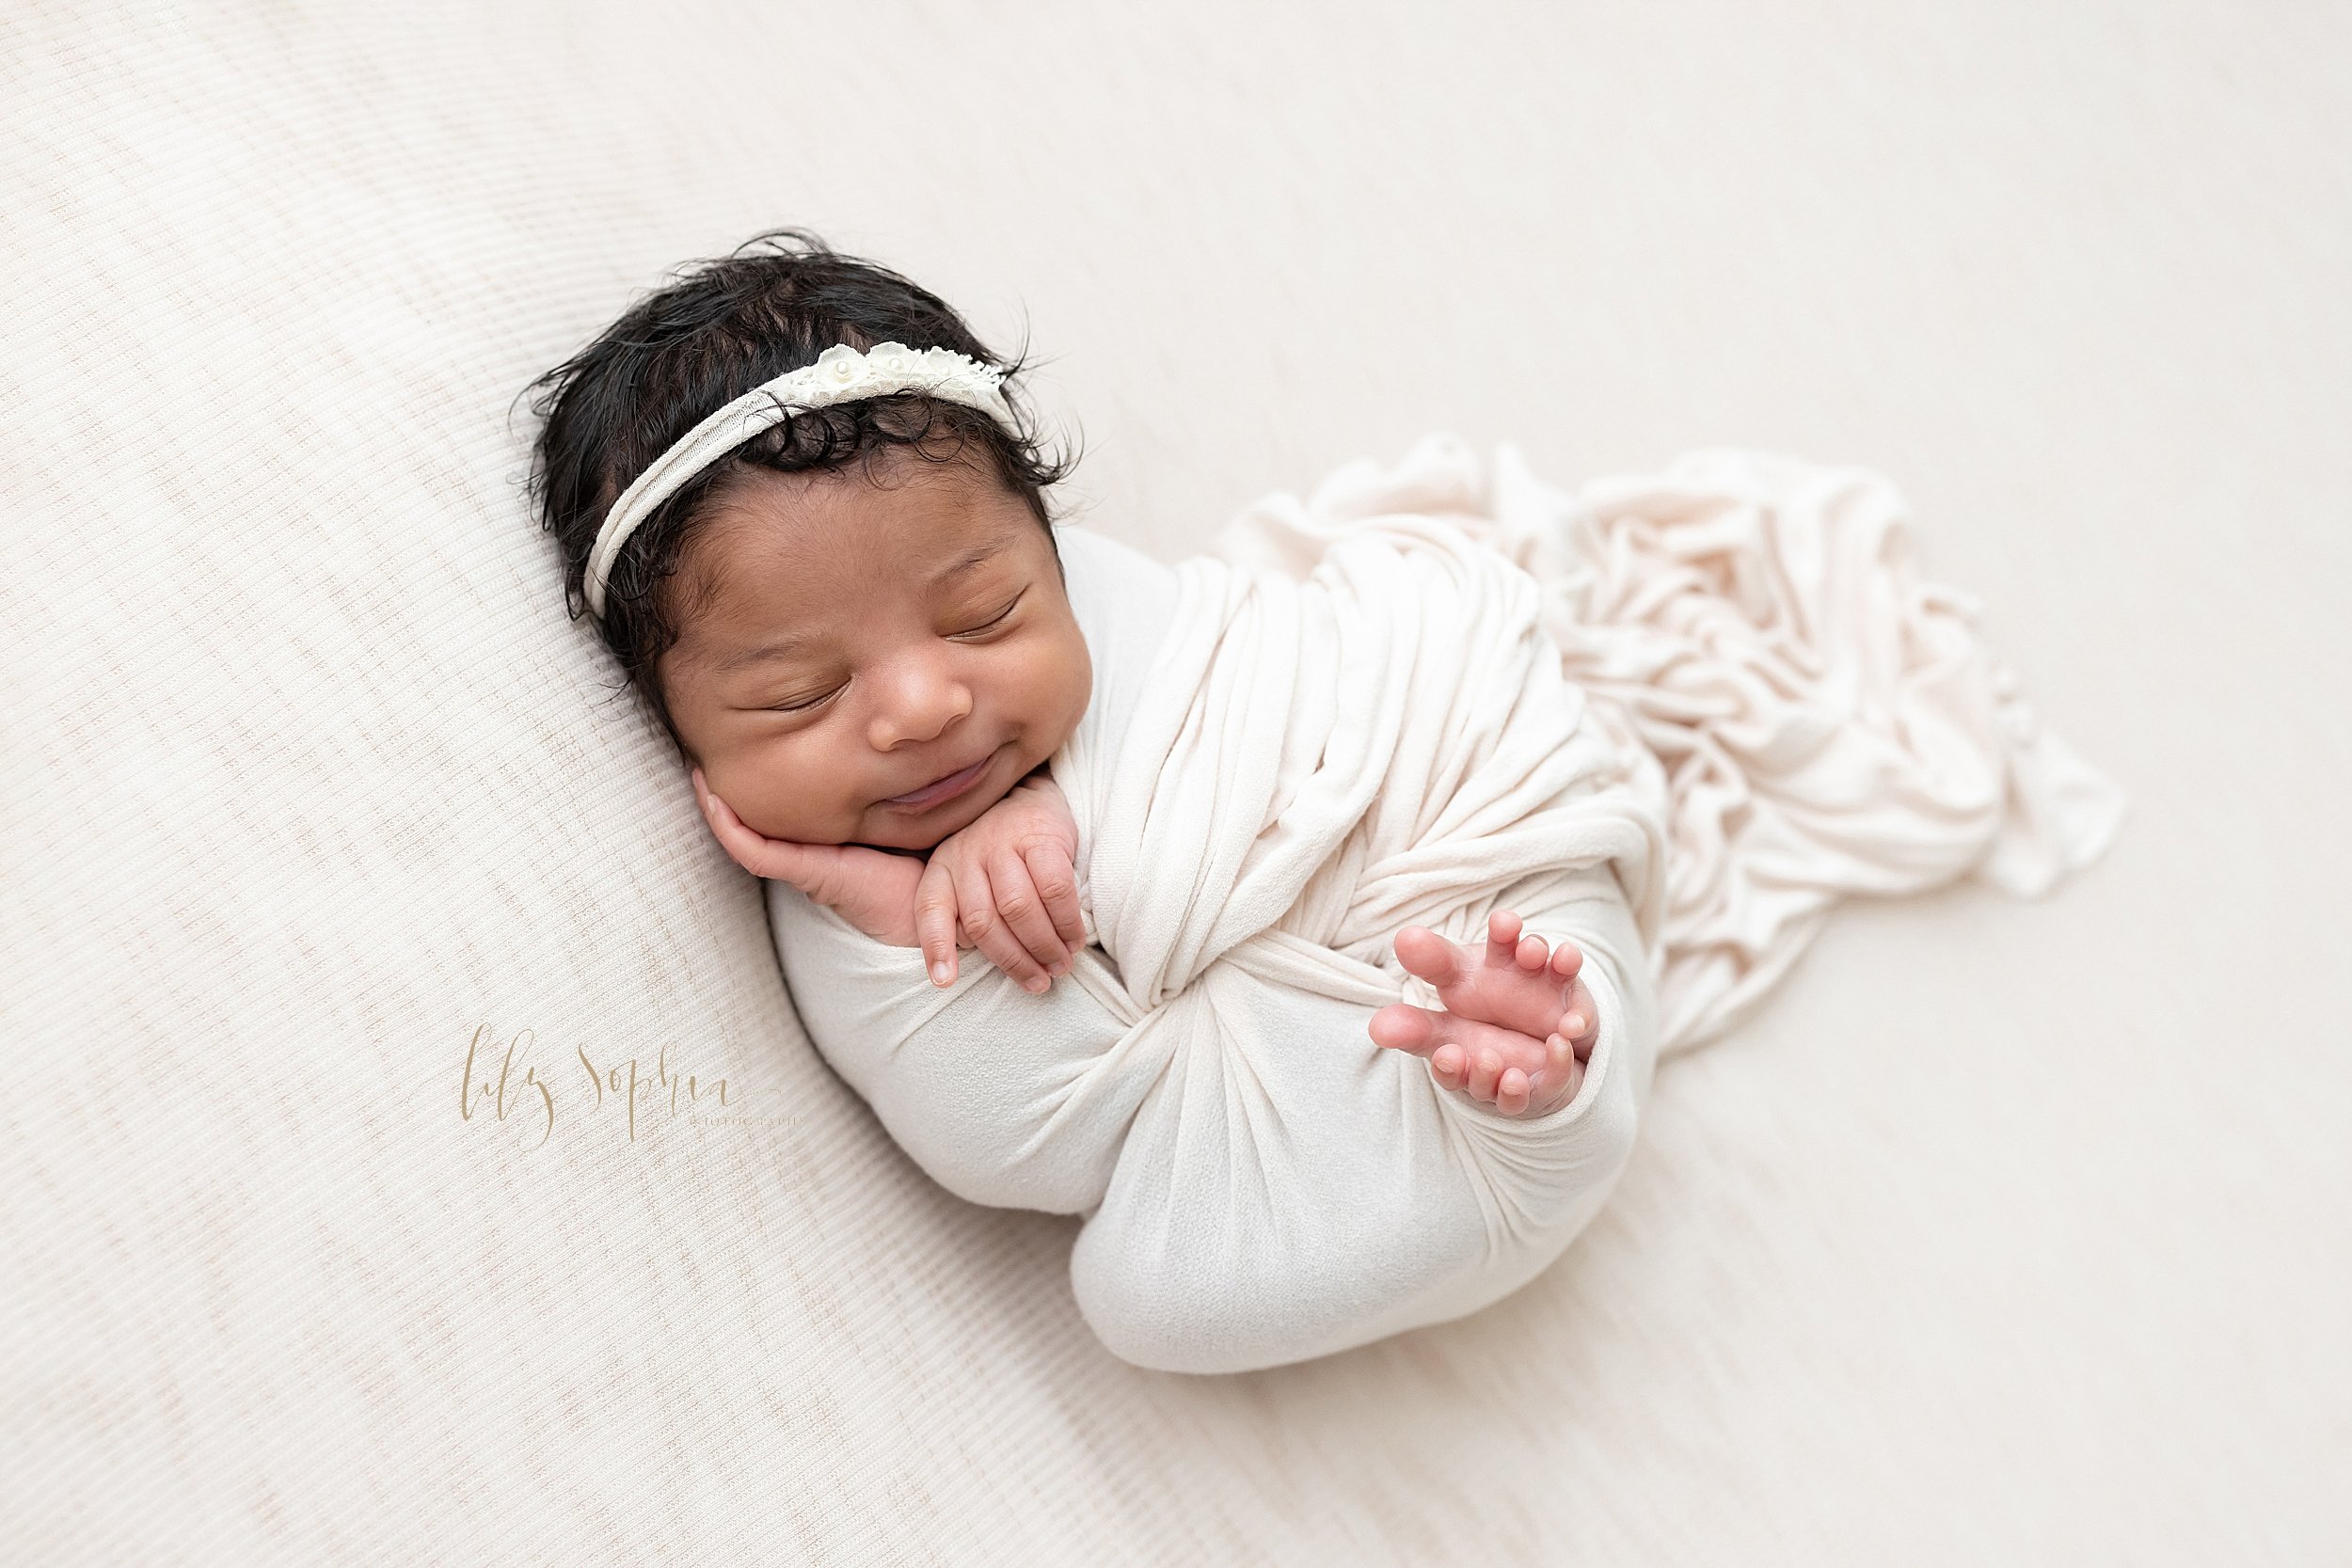  Newborn photo of a baby girl cradled in a stretchy swaddle with her tiny toes peeking out and her right hand holding her cheek and her left hand under her chin as she smiles in her sleep wearing a stretchy rose headband in her curly black hair taken